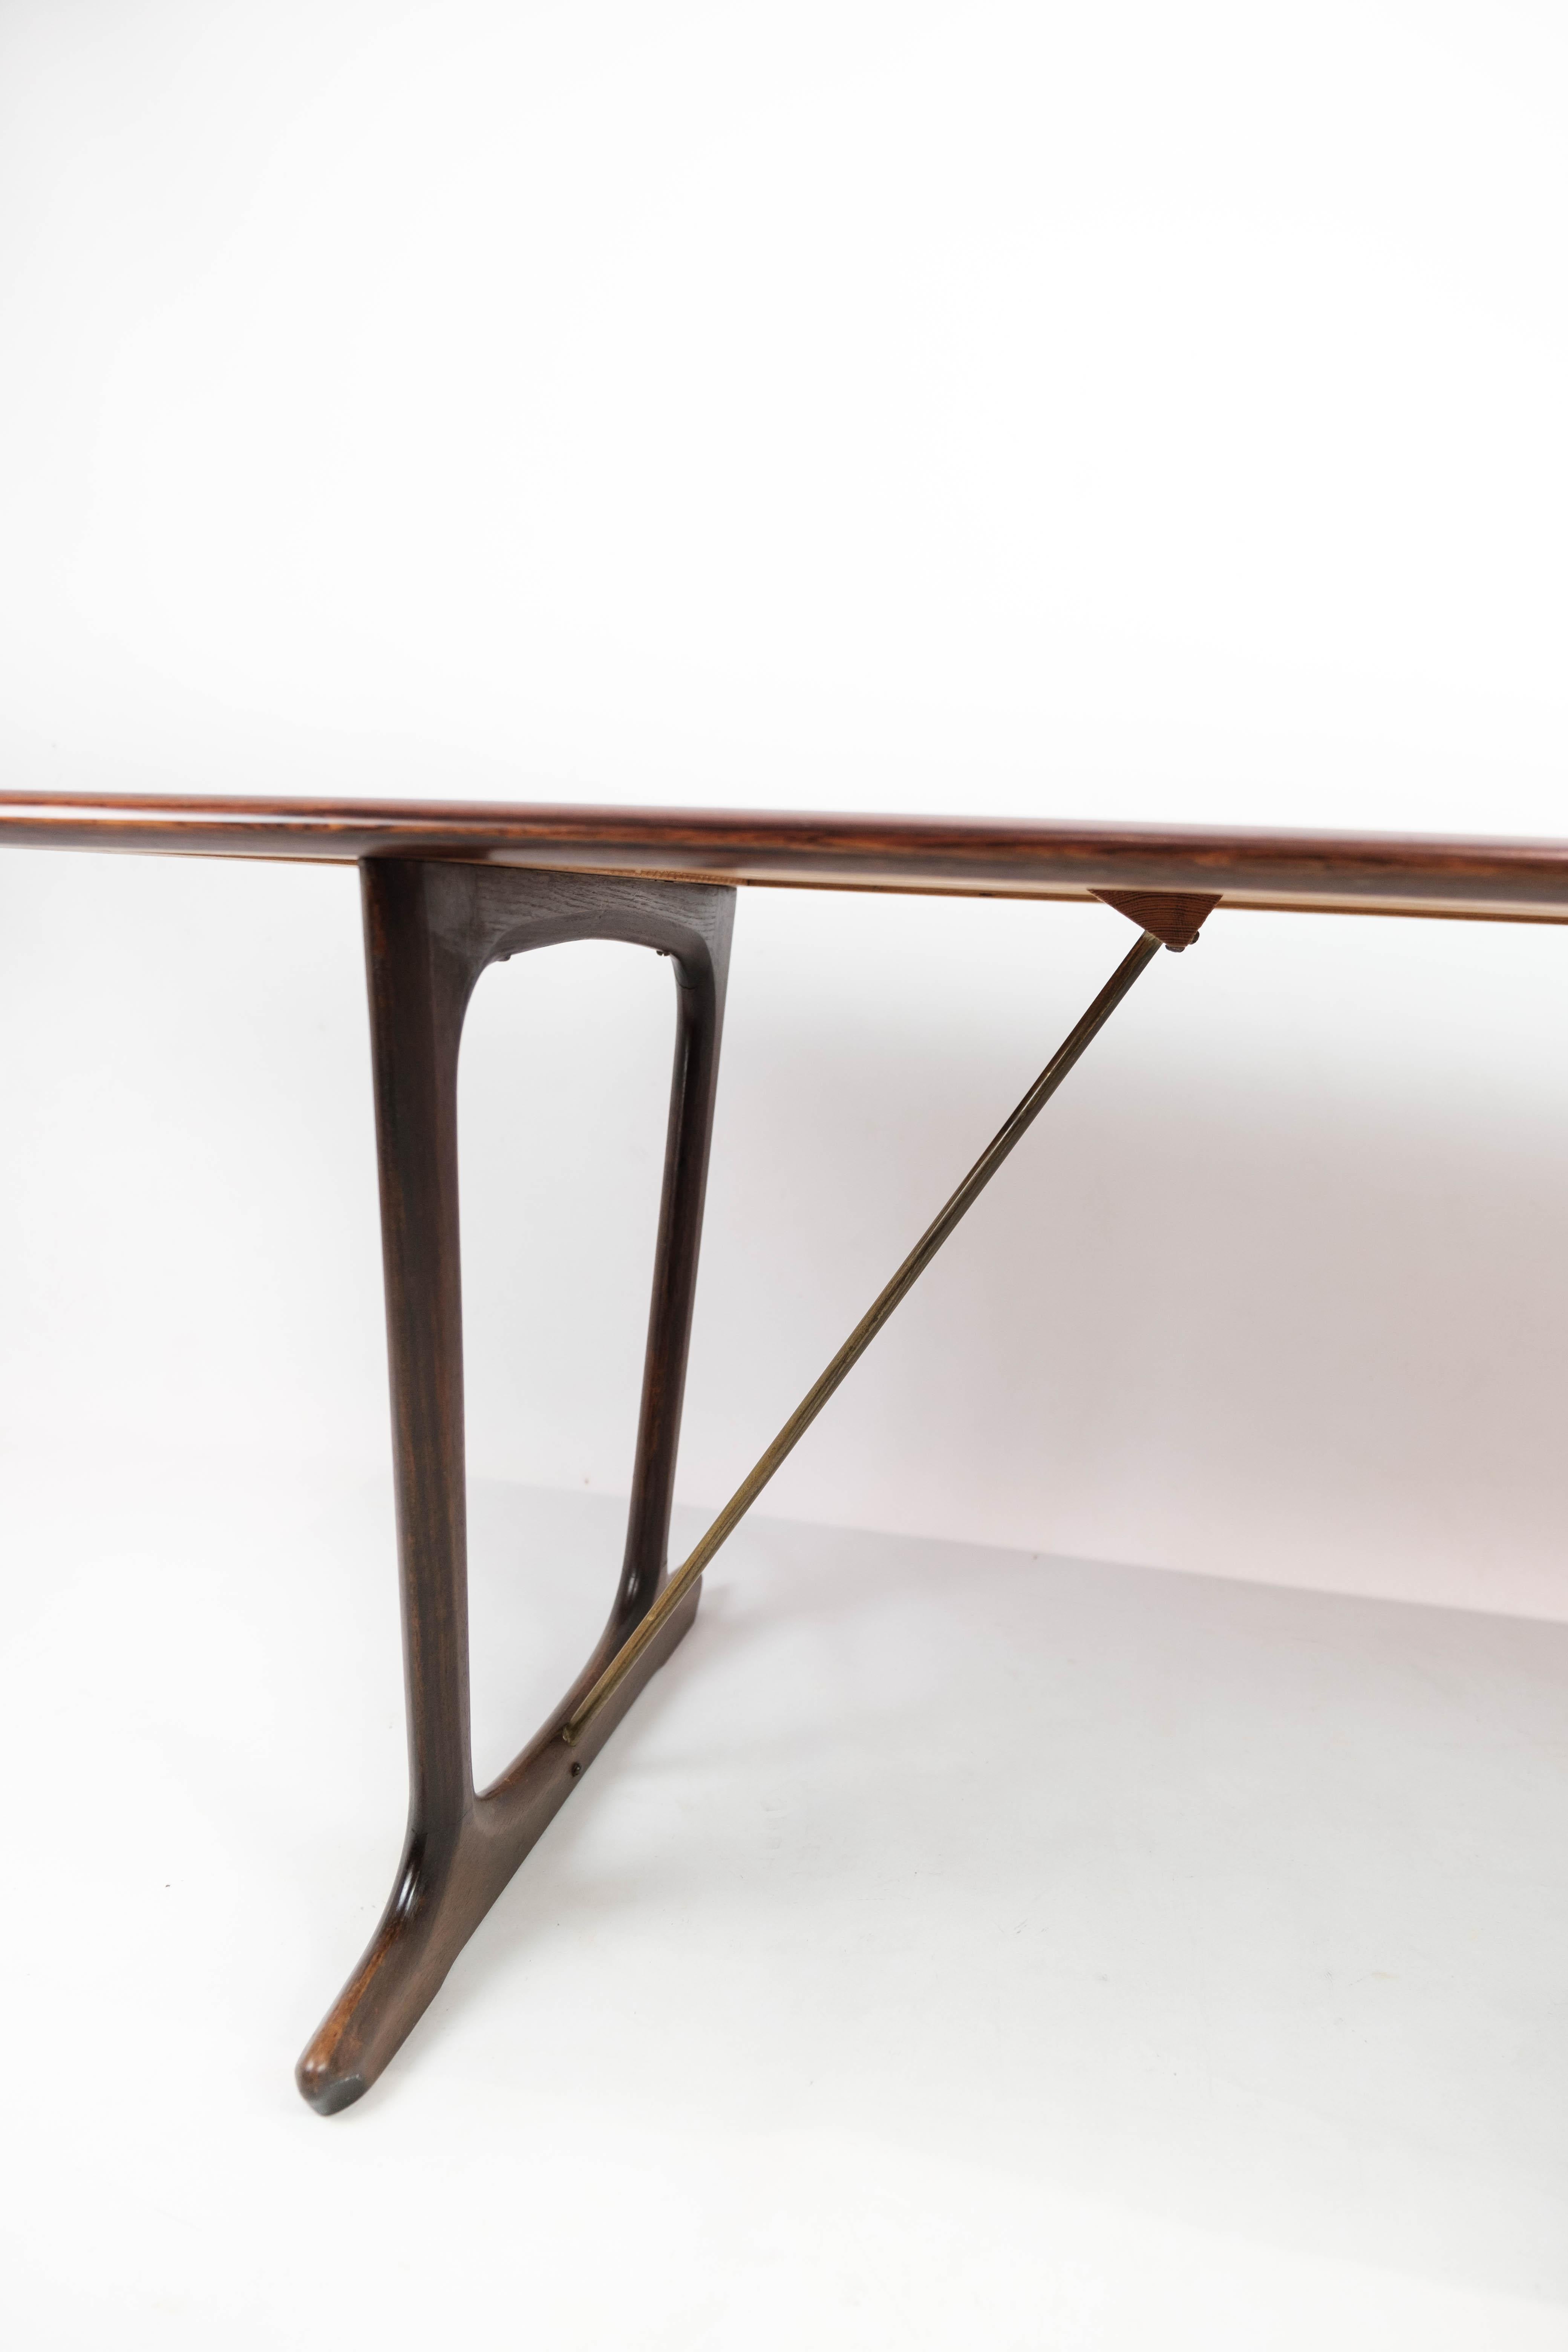 Mid-20th Century Coffee Table in Rosewood of Danish Design from the 1960s